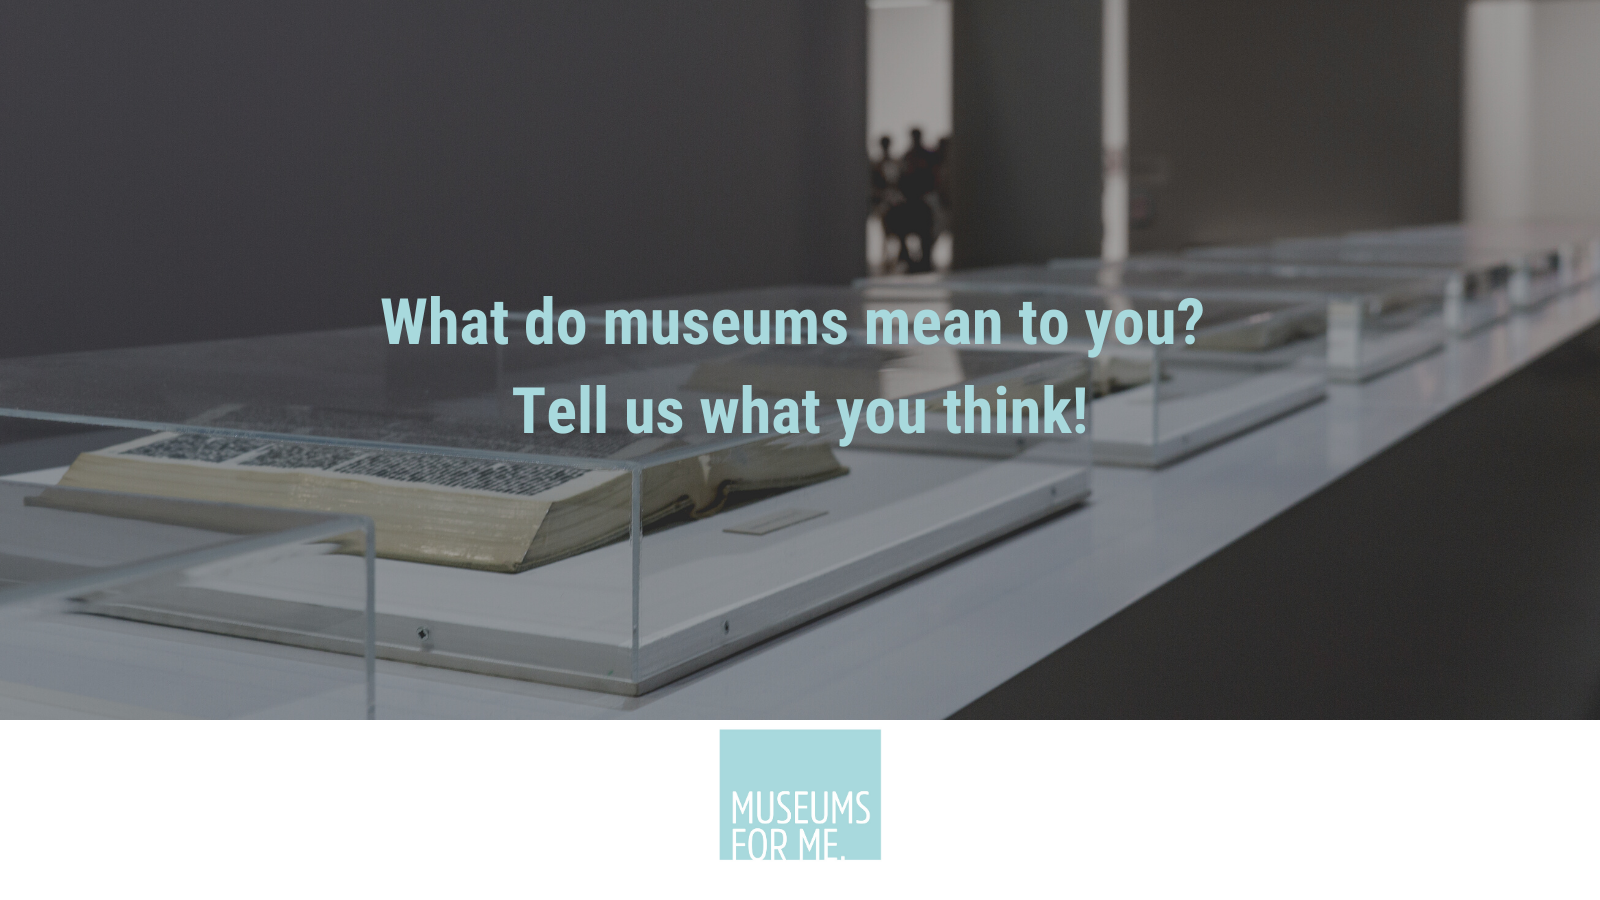 The text "What do museums mean to you? Tell us what you think!" overtop an image of an artifact display case. 